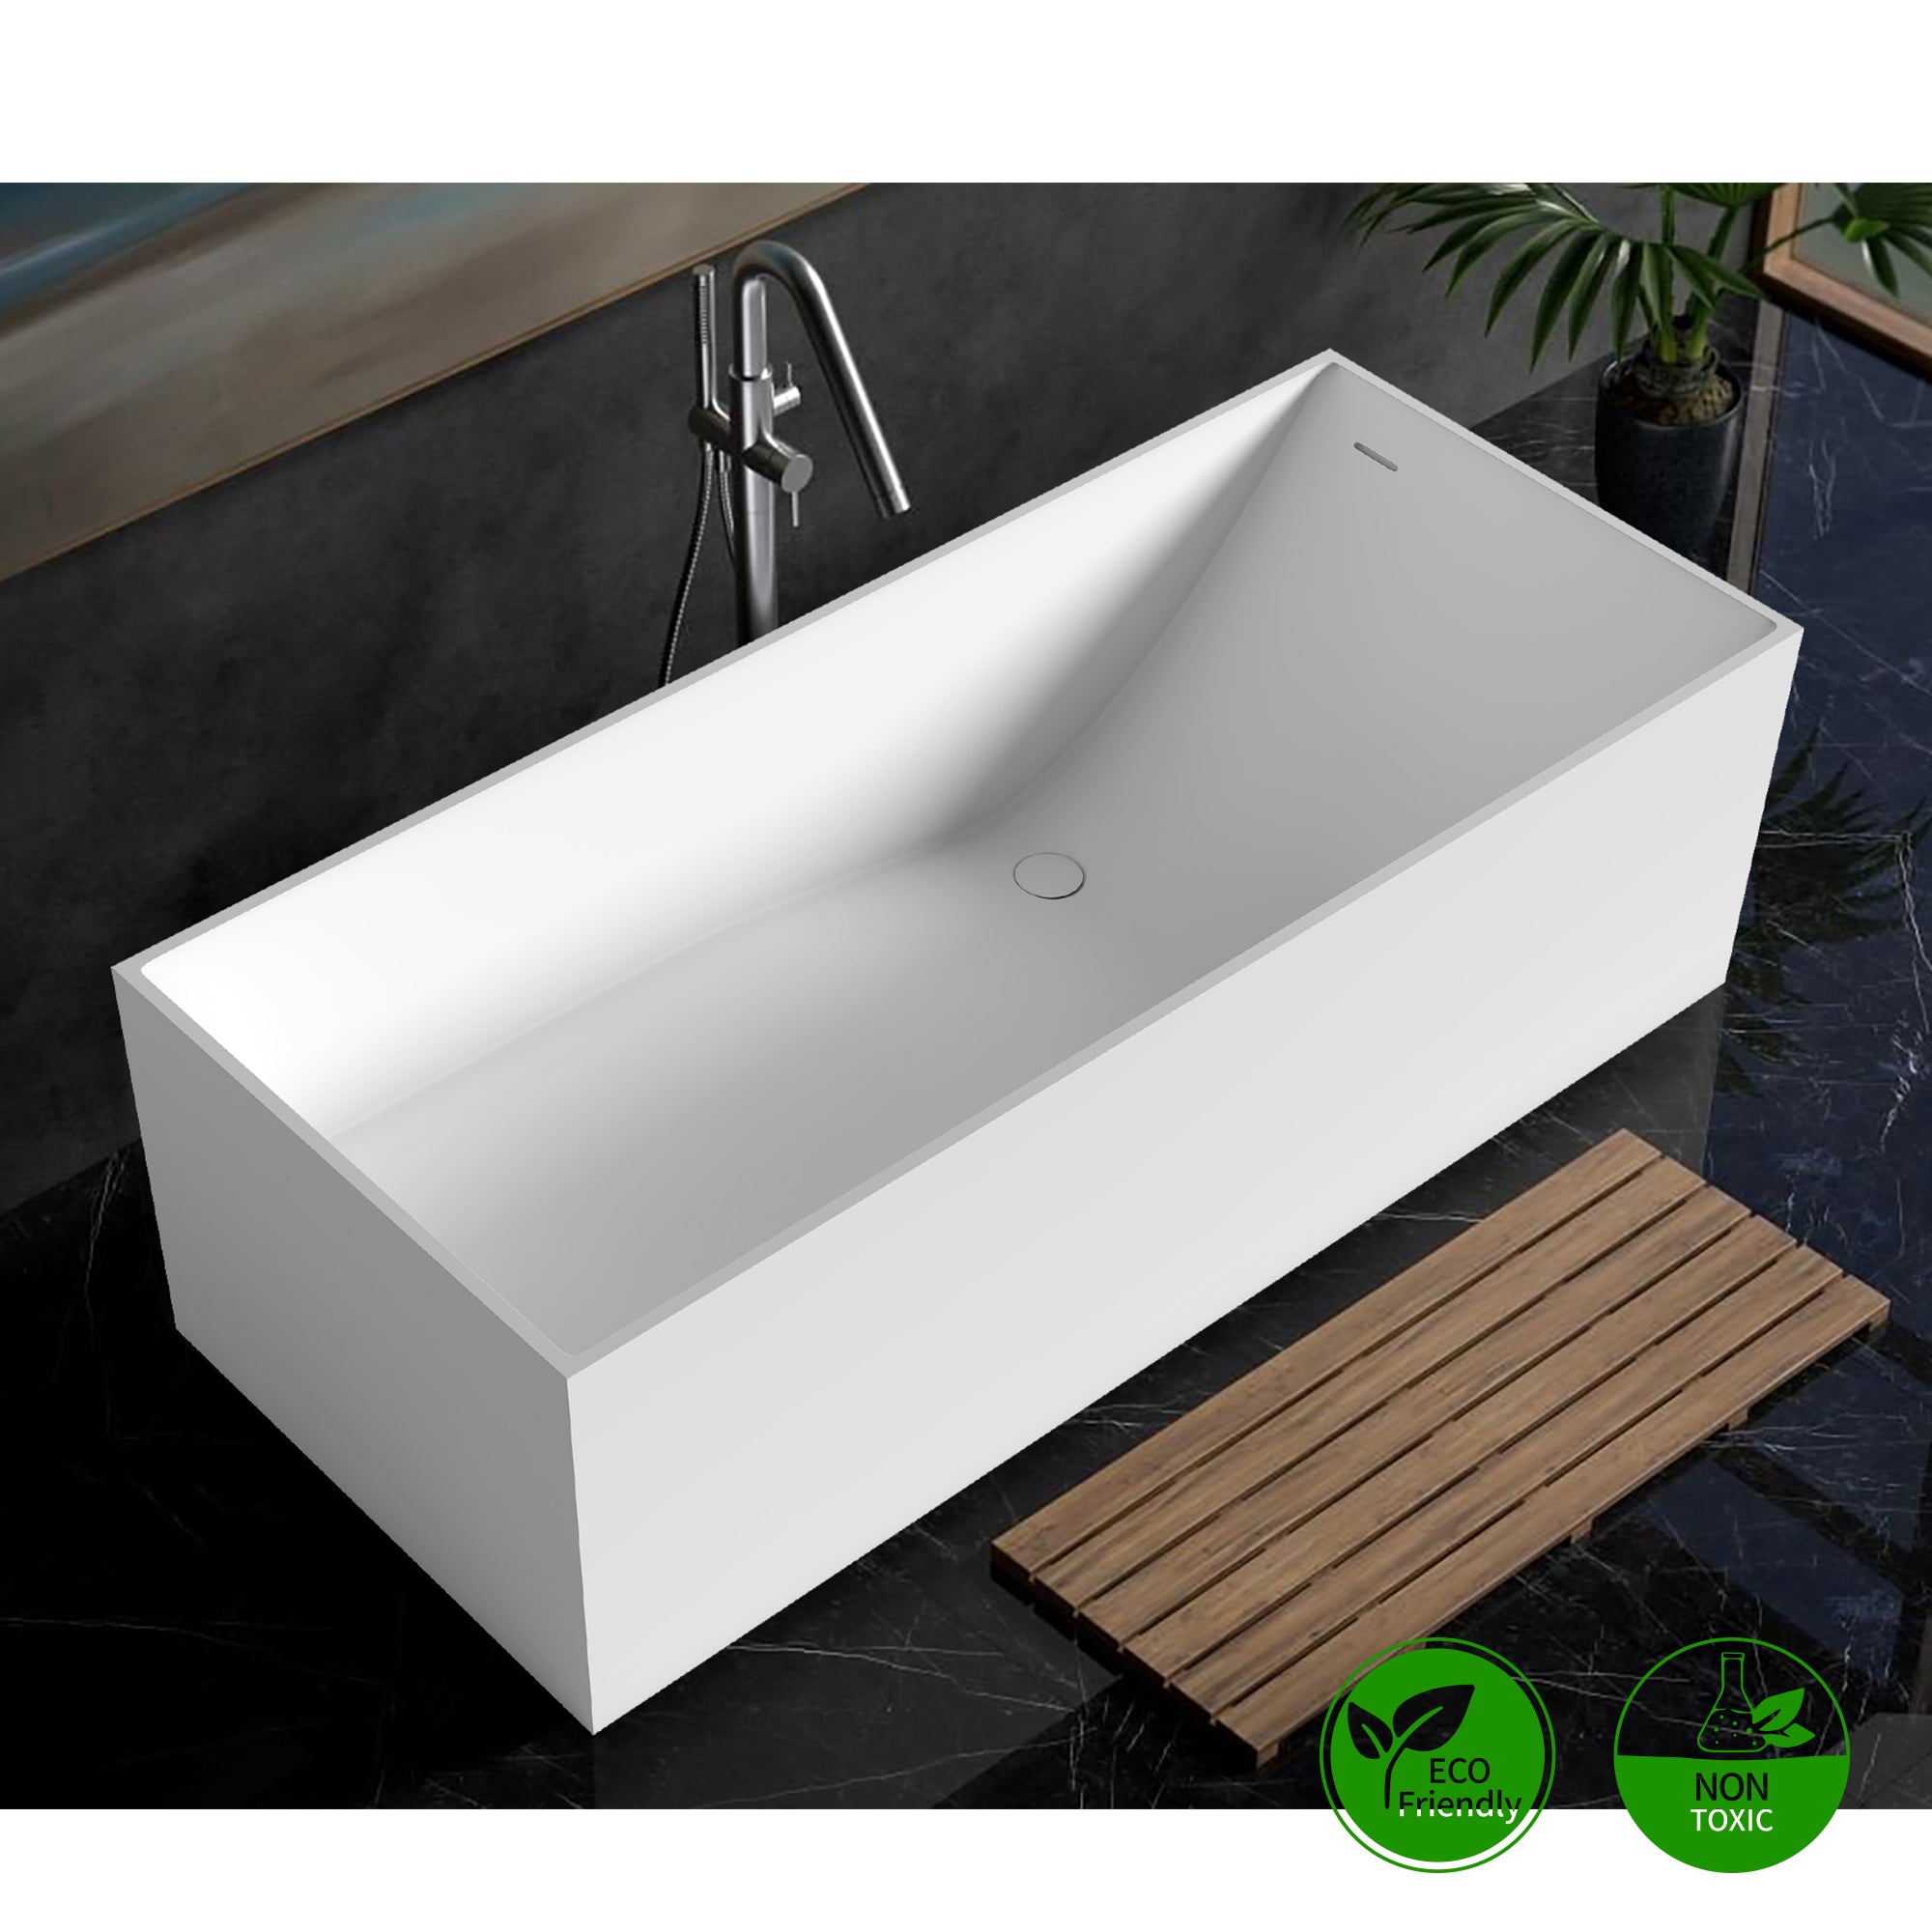 67" Oval Shaped Freestanding Solid Surface Soaking Bathtub with Overflow RX-S13-67